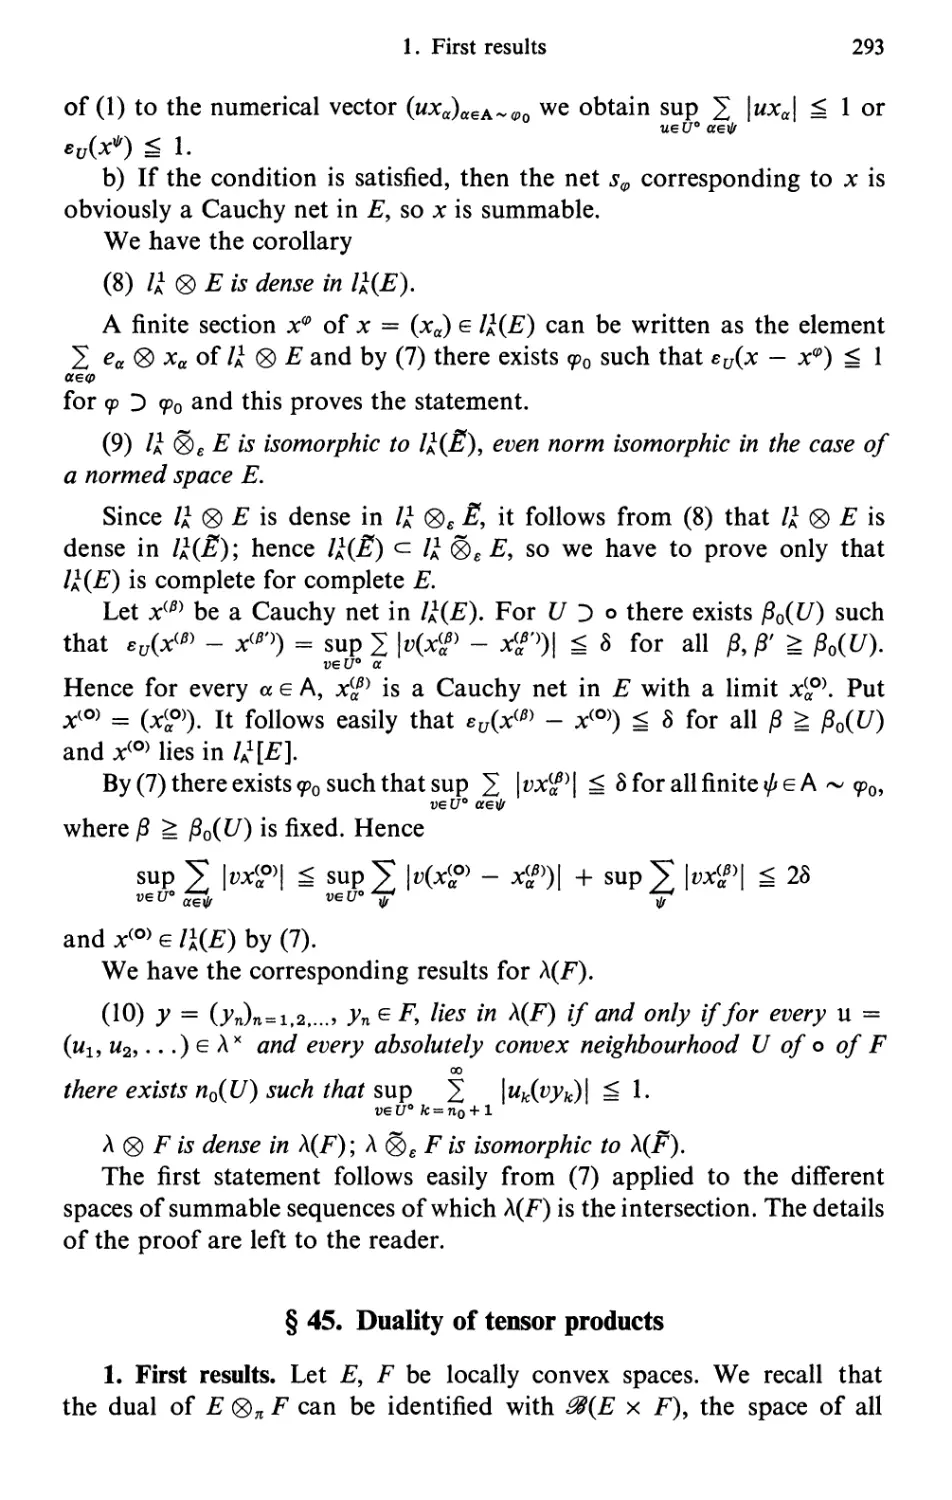 §45. Duality of tensor products